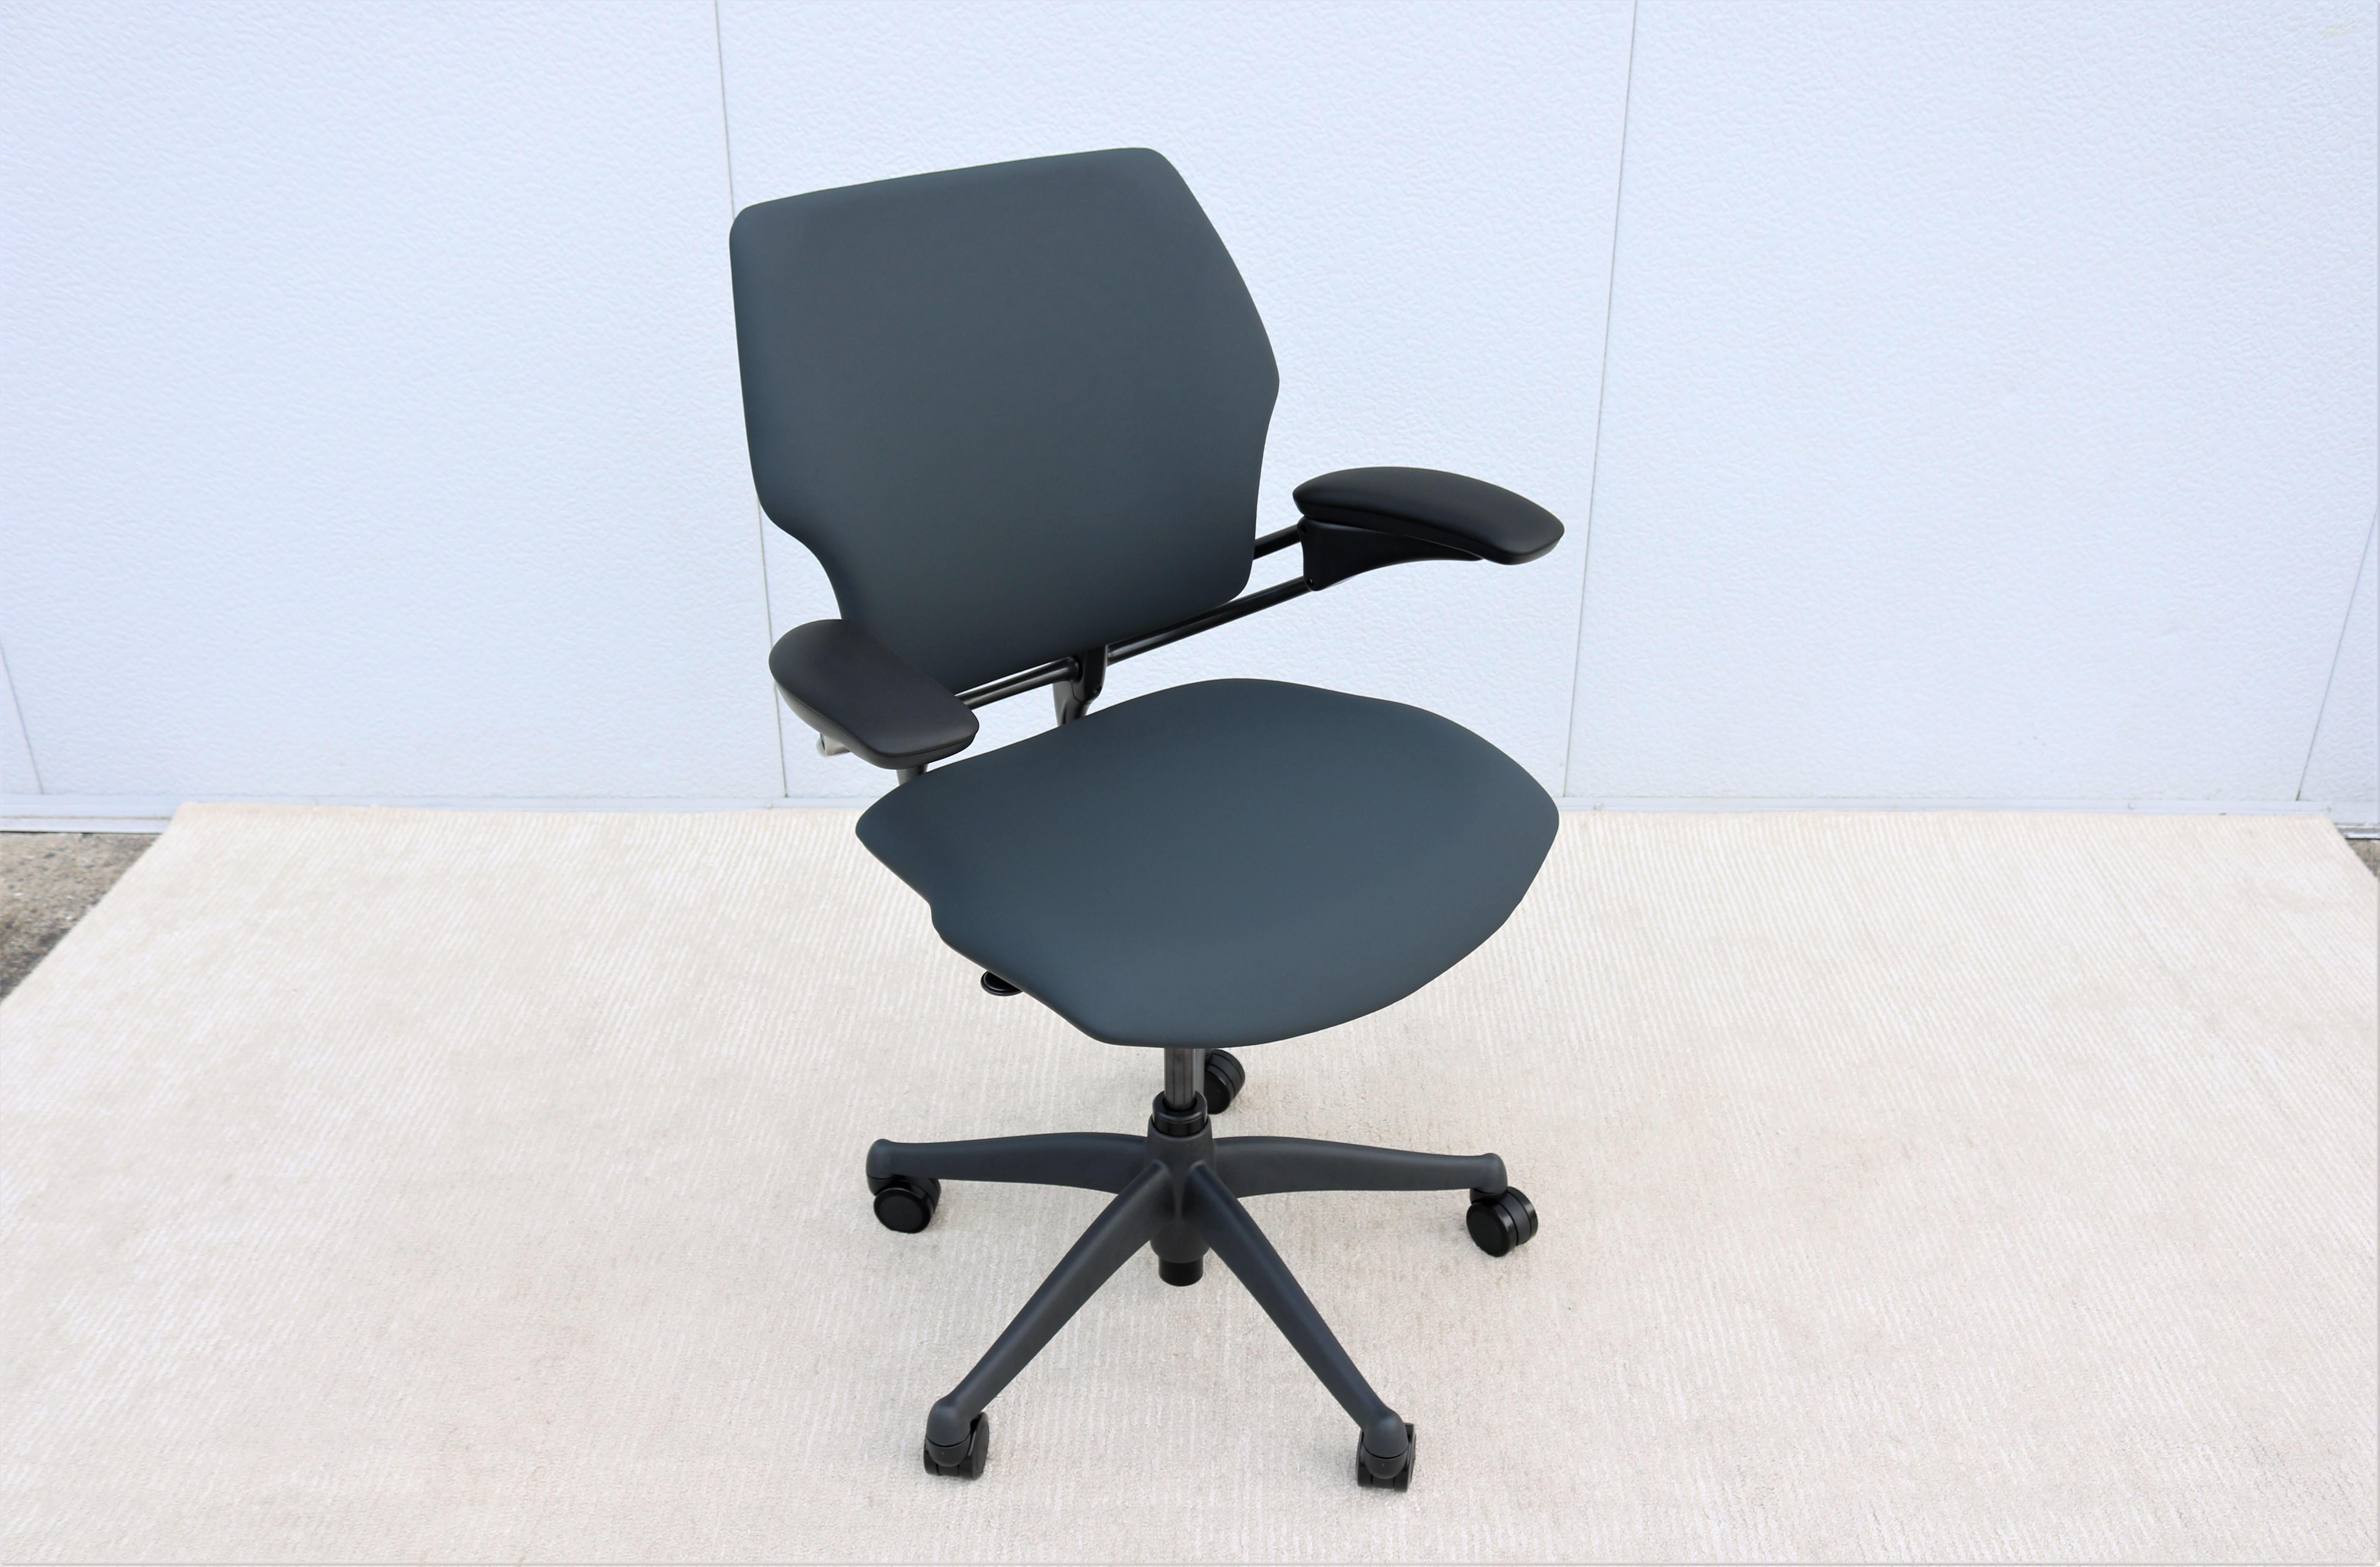 A winner of over 10 major design awards to date, the freedom chair has revolutionized the way people sit. 
It automatically adjusts to every user, designed to eliminate the need for manual controls.
With its sophisticated weight-sensitive